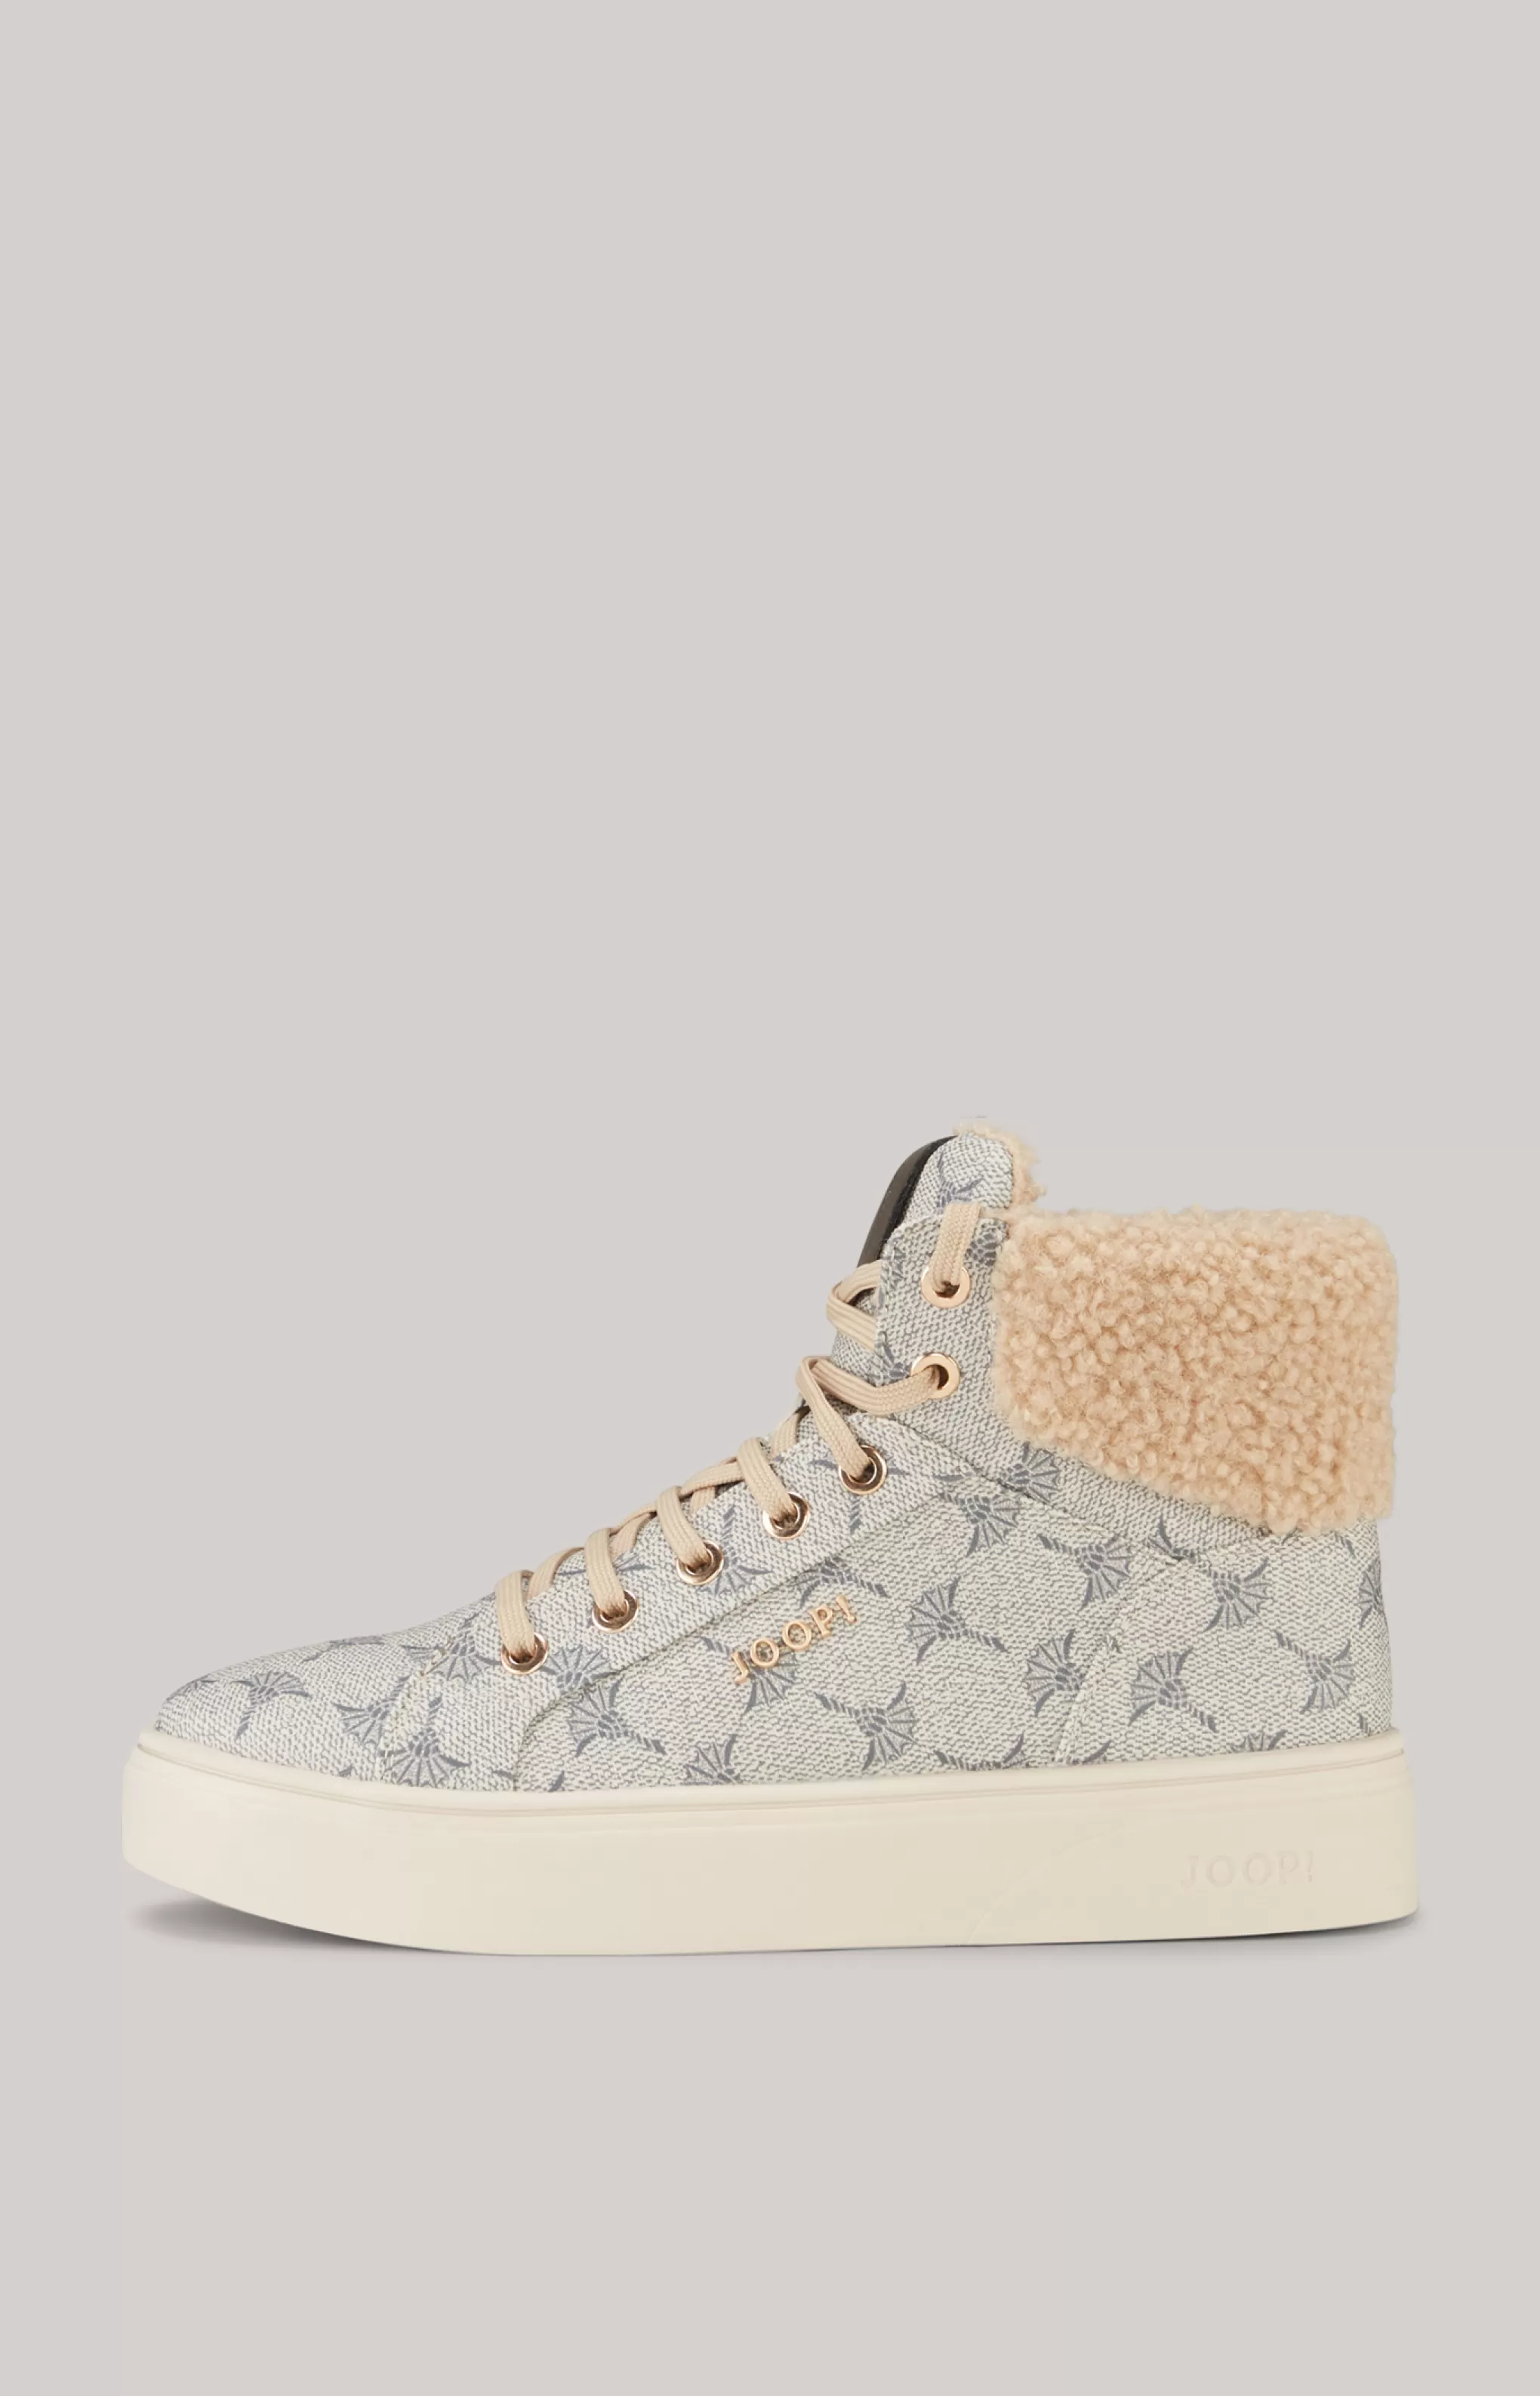 Shoes*JOOP Shoes Mazzolino Peluche New Daphne High-top Trainers in /Grey